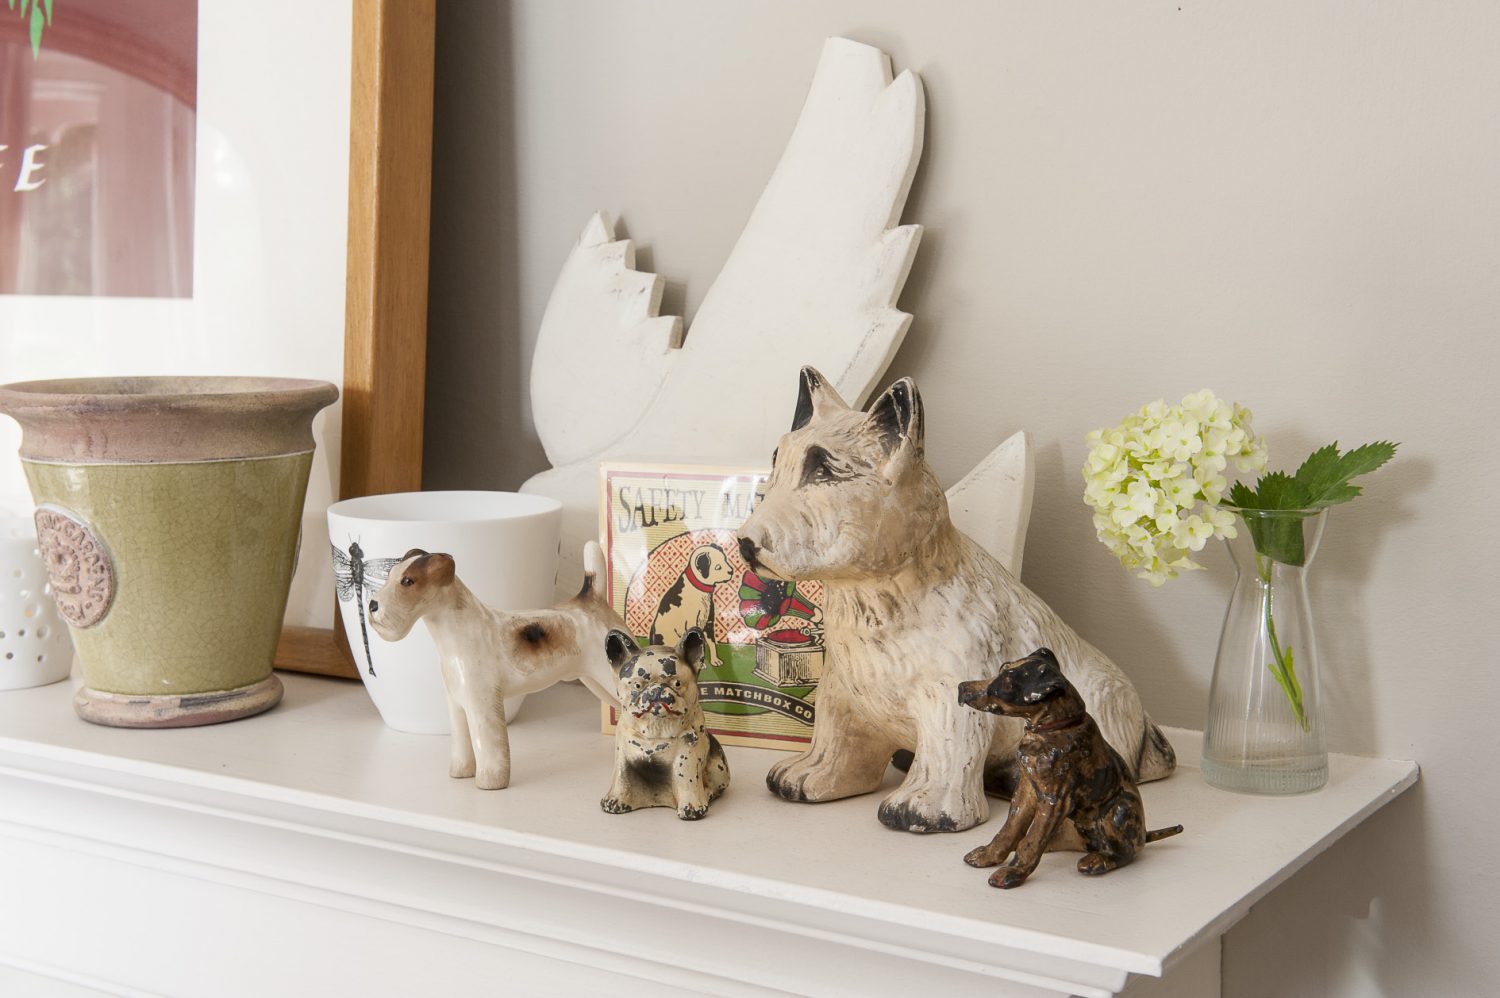 Diana has recently started a collection of ceramic dogs